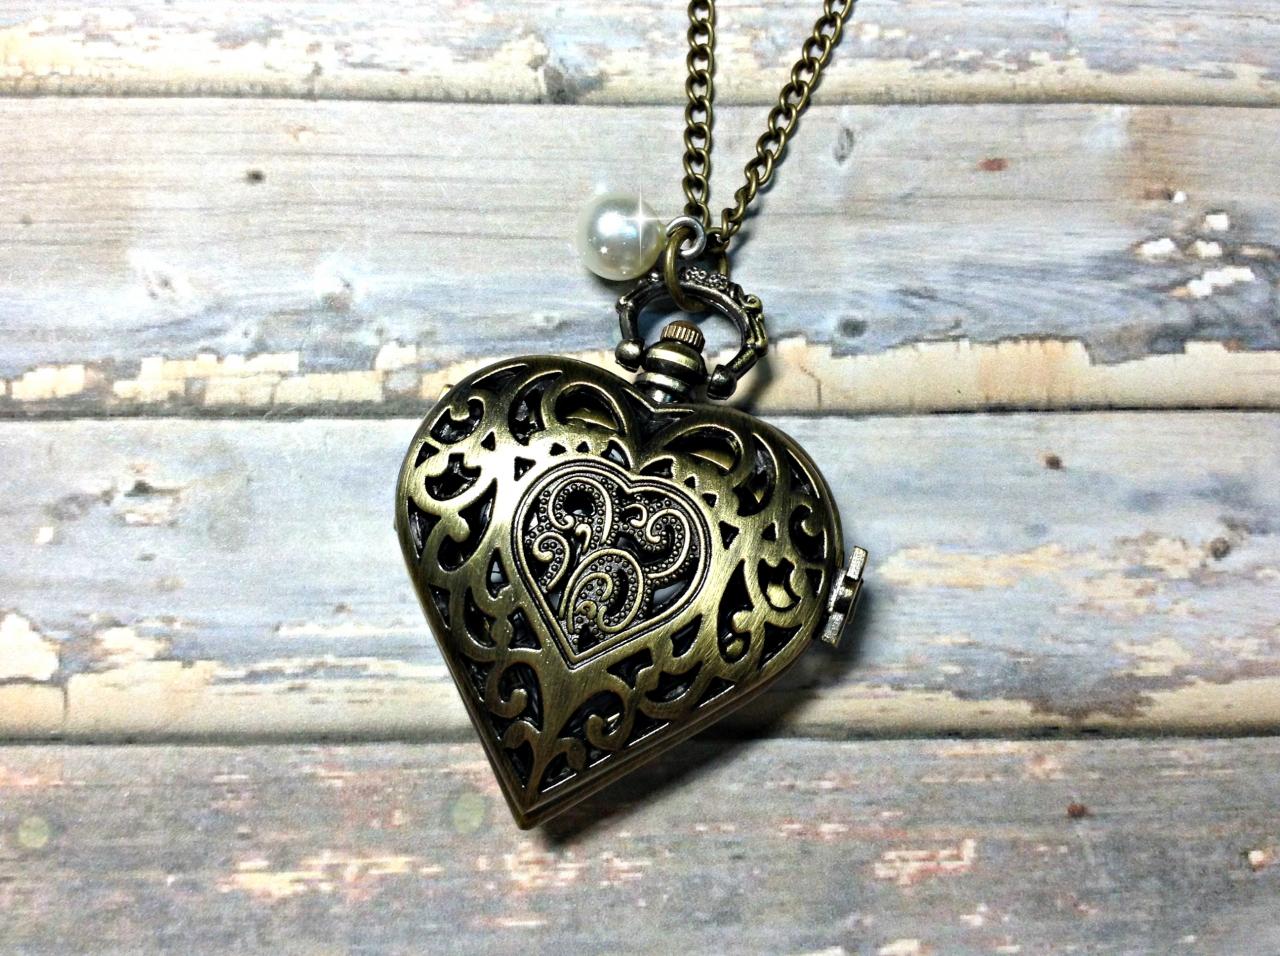 Handmade Vintage Pocket Watch Heart Necklace With Pearl Pendant